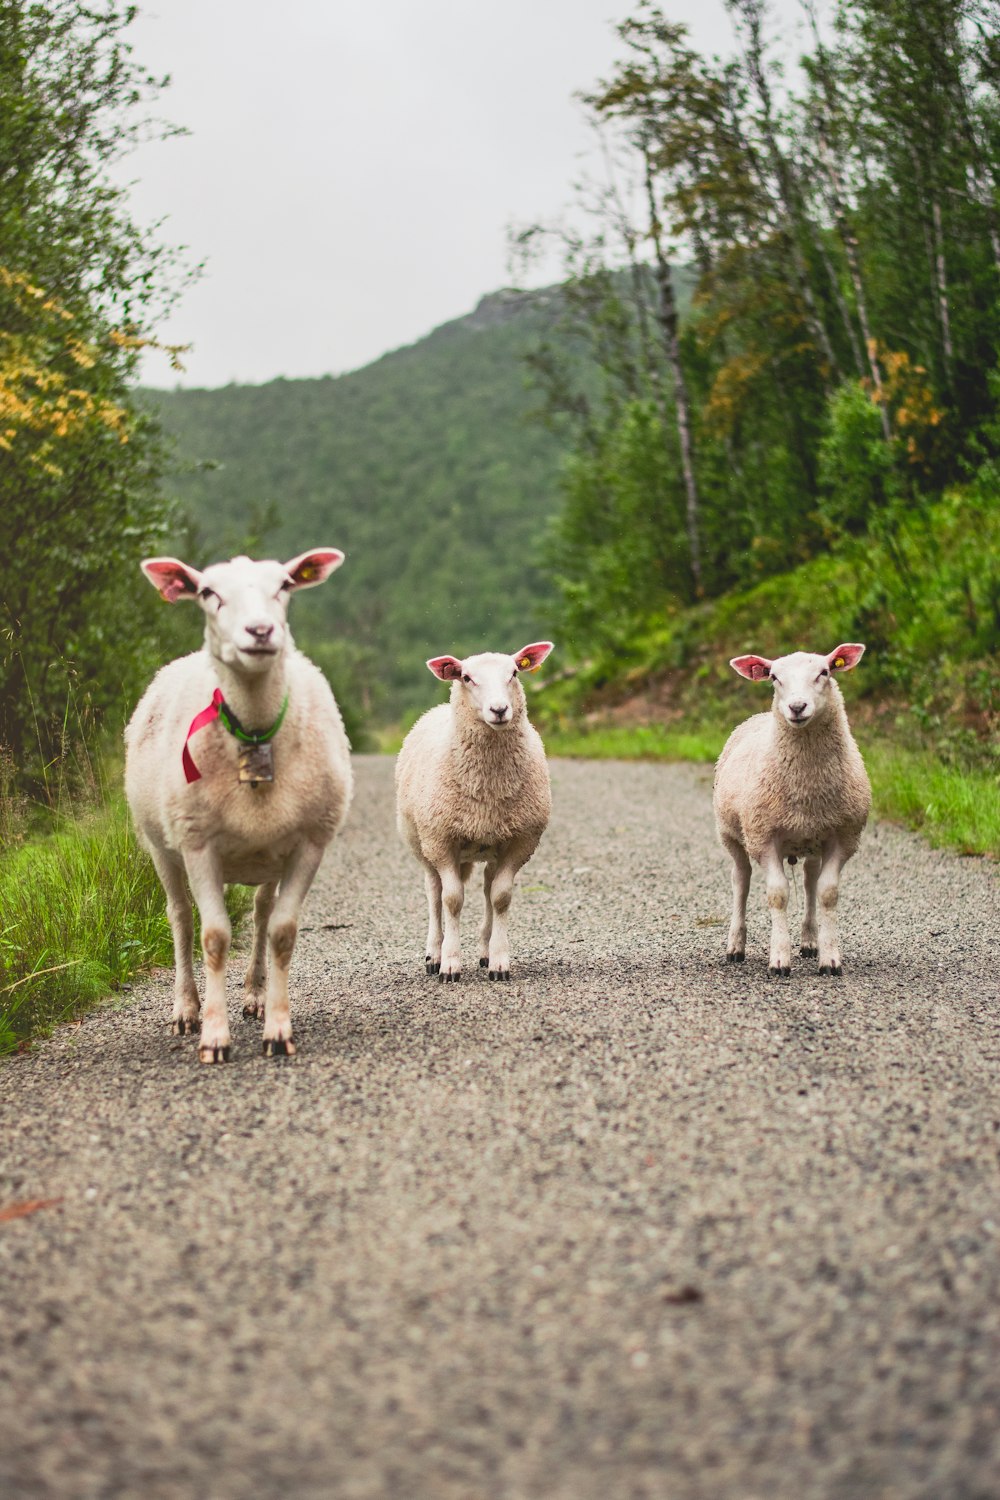 three white goats on dirt road during day